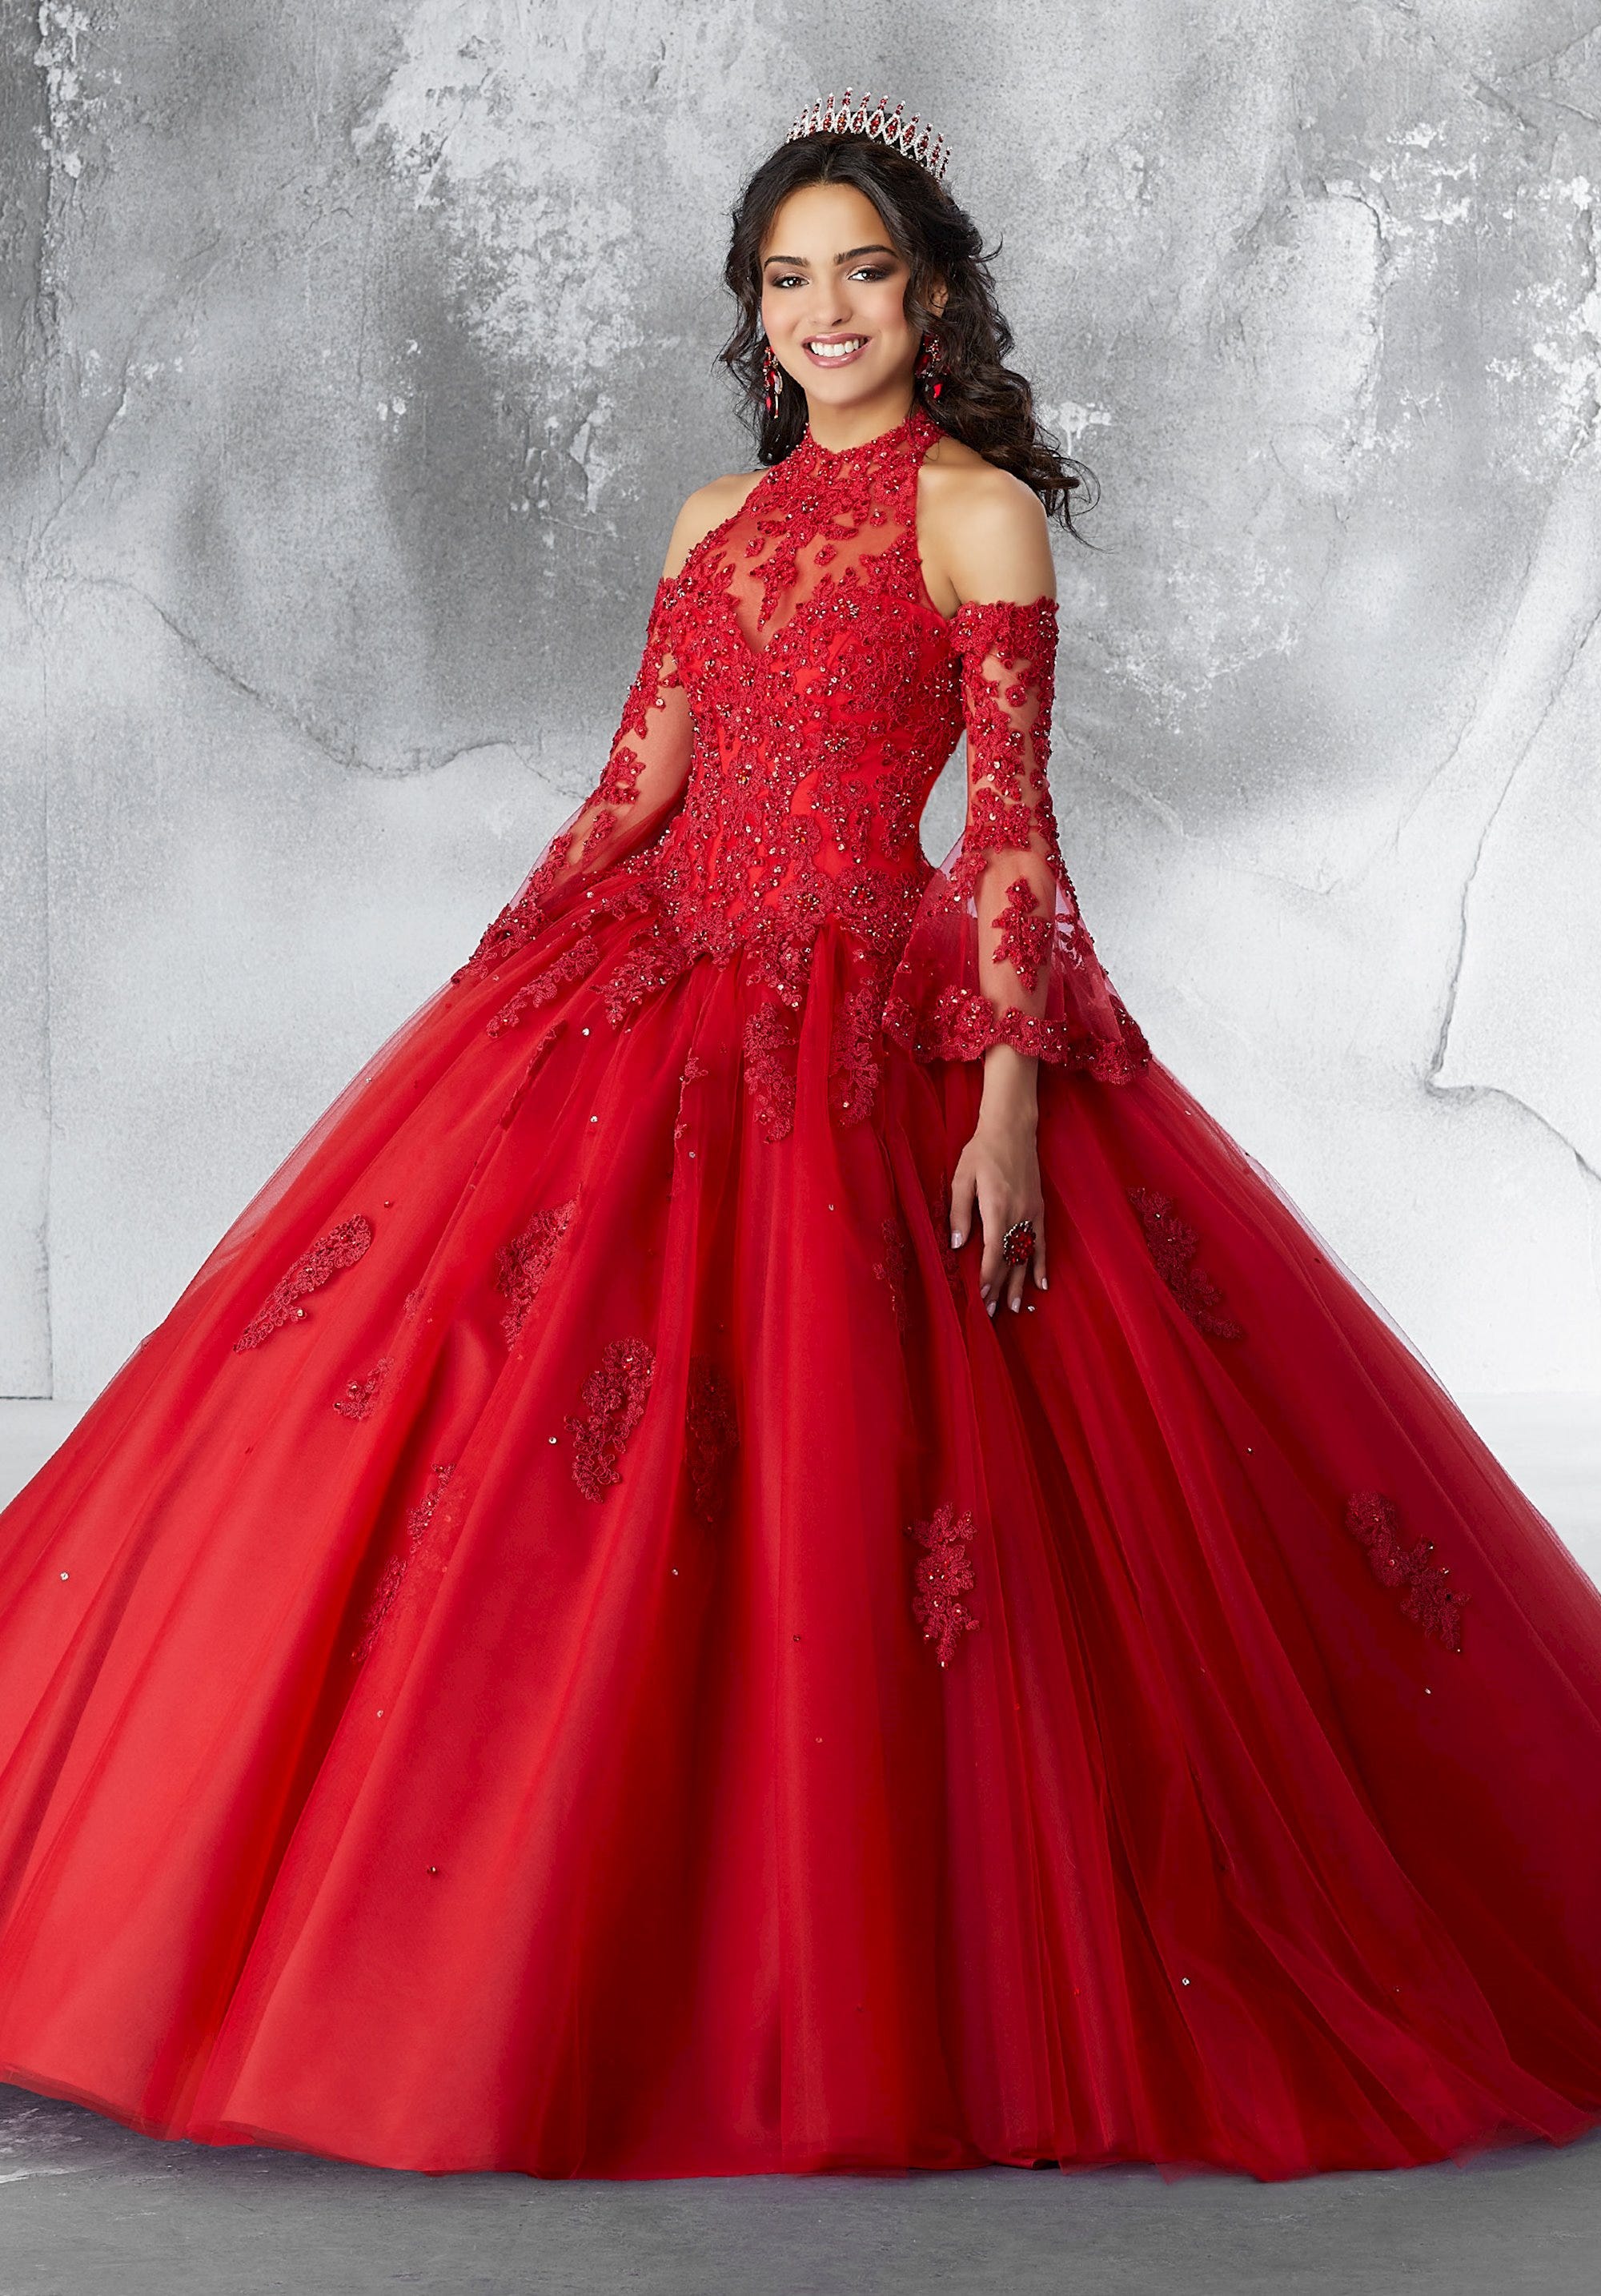 beautiful gown 2019